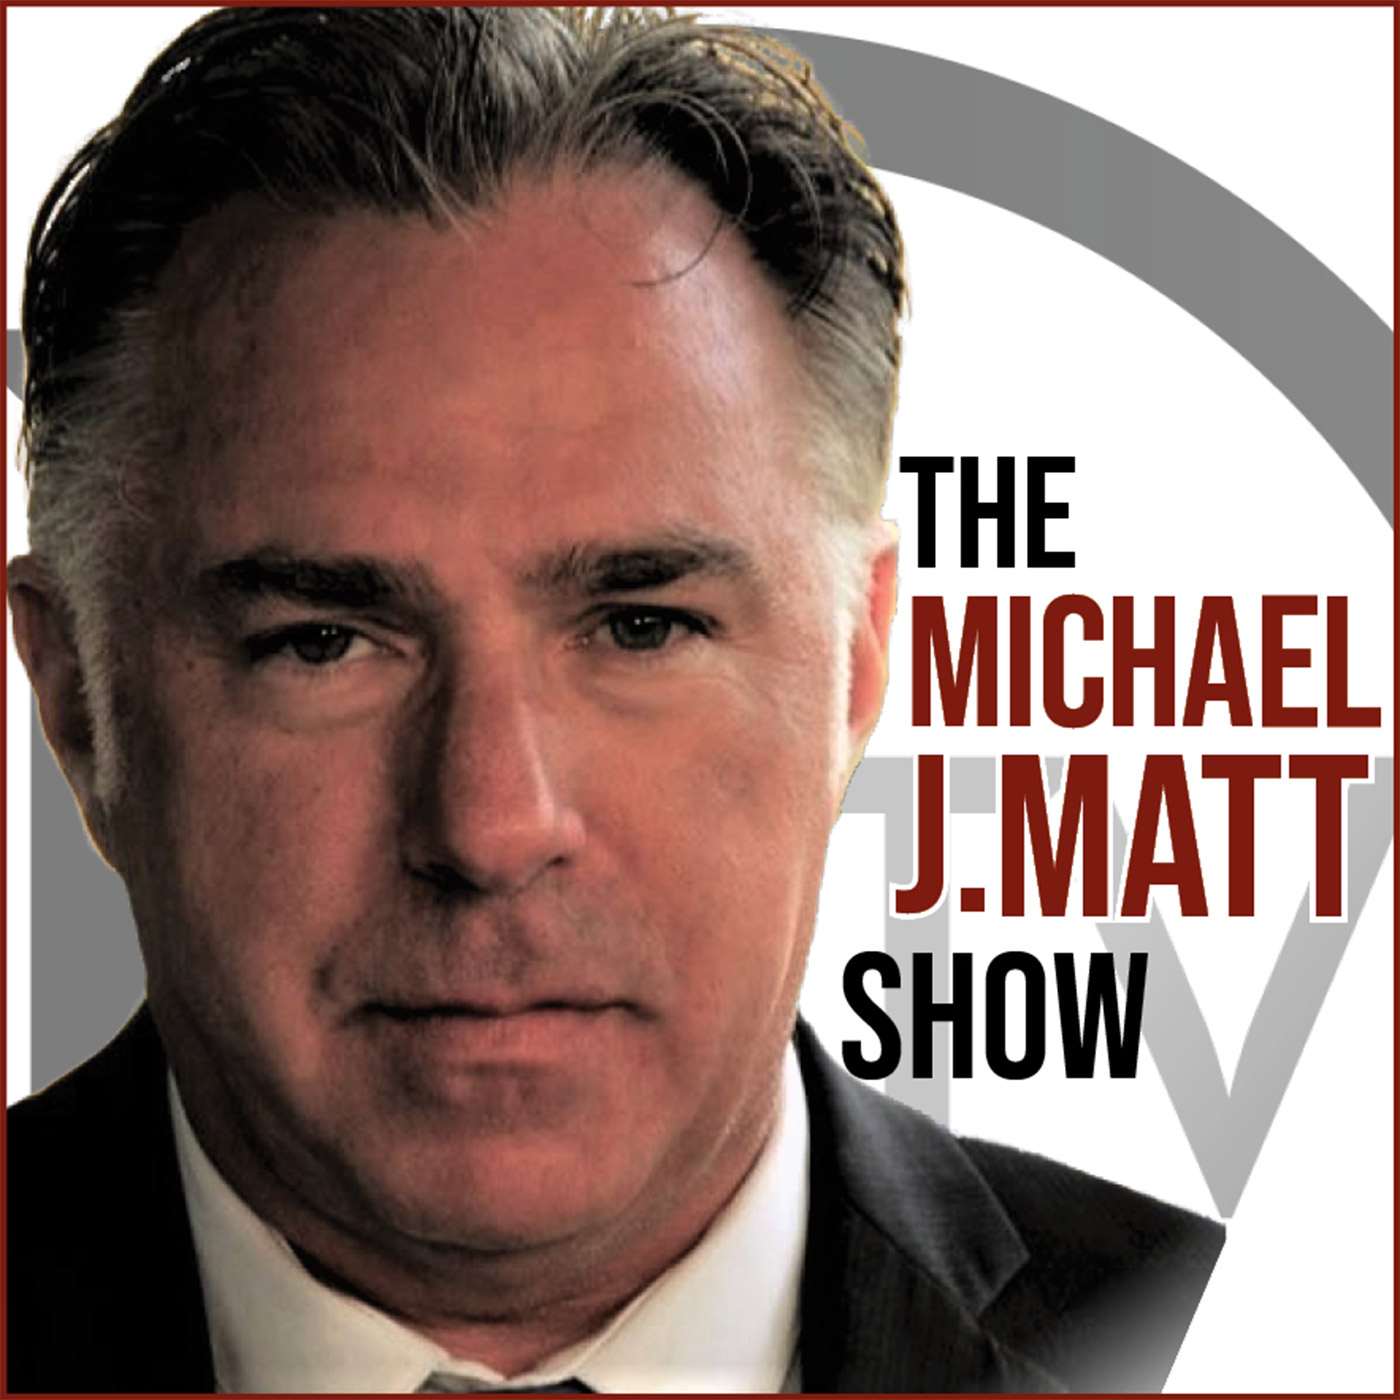 WORLD VACCINATION: Michael Matt on the Kennedy Connection